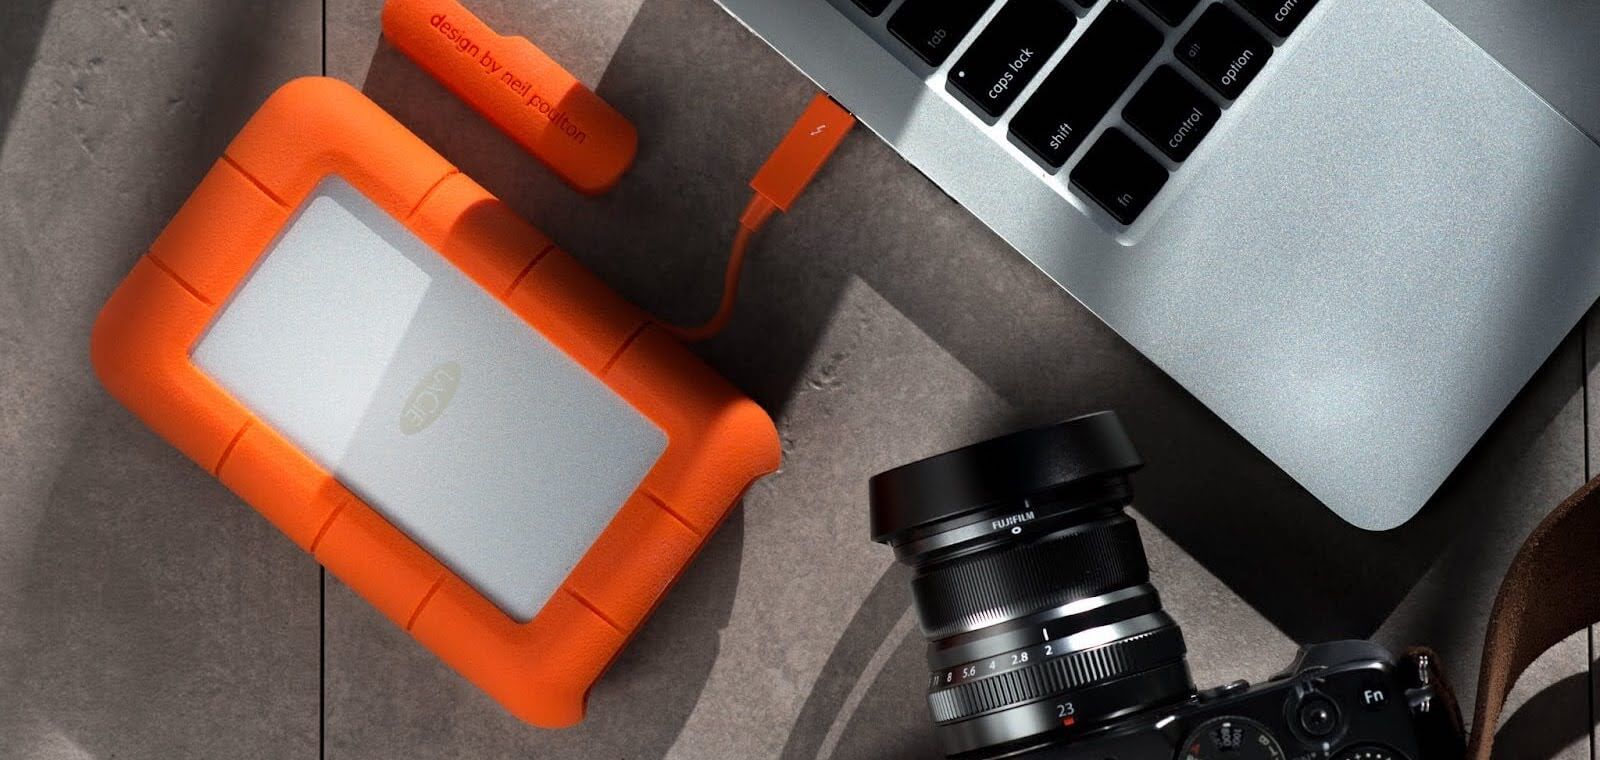 LaCie external hard drives are great for photography backups